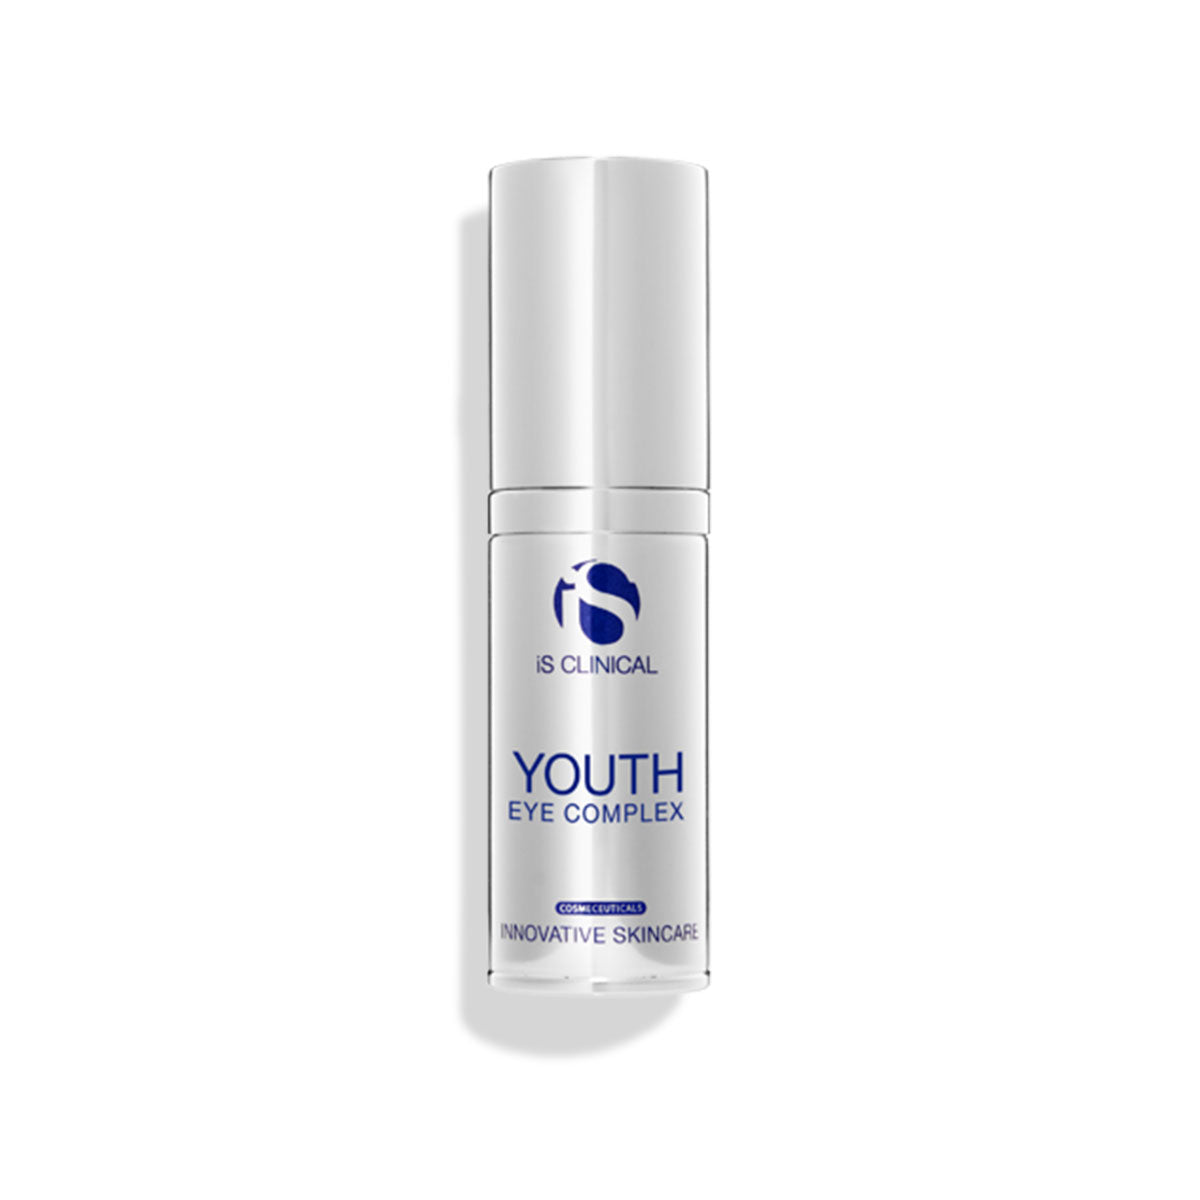 is clinical youth eye complex botanical anti-aging skincare